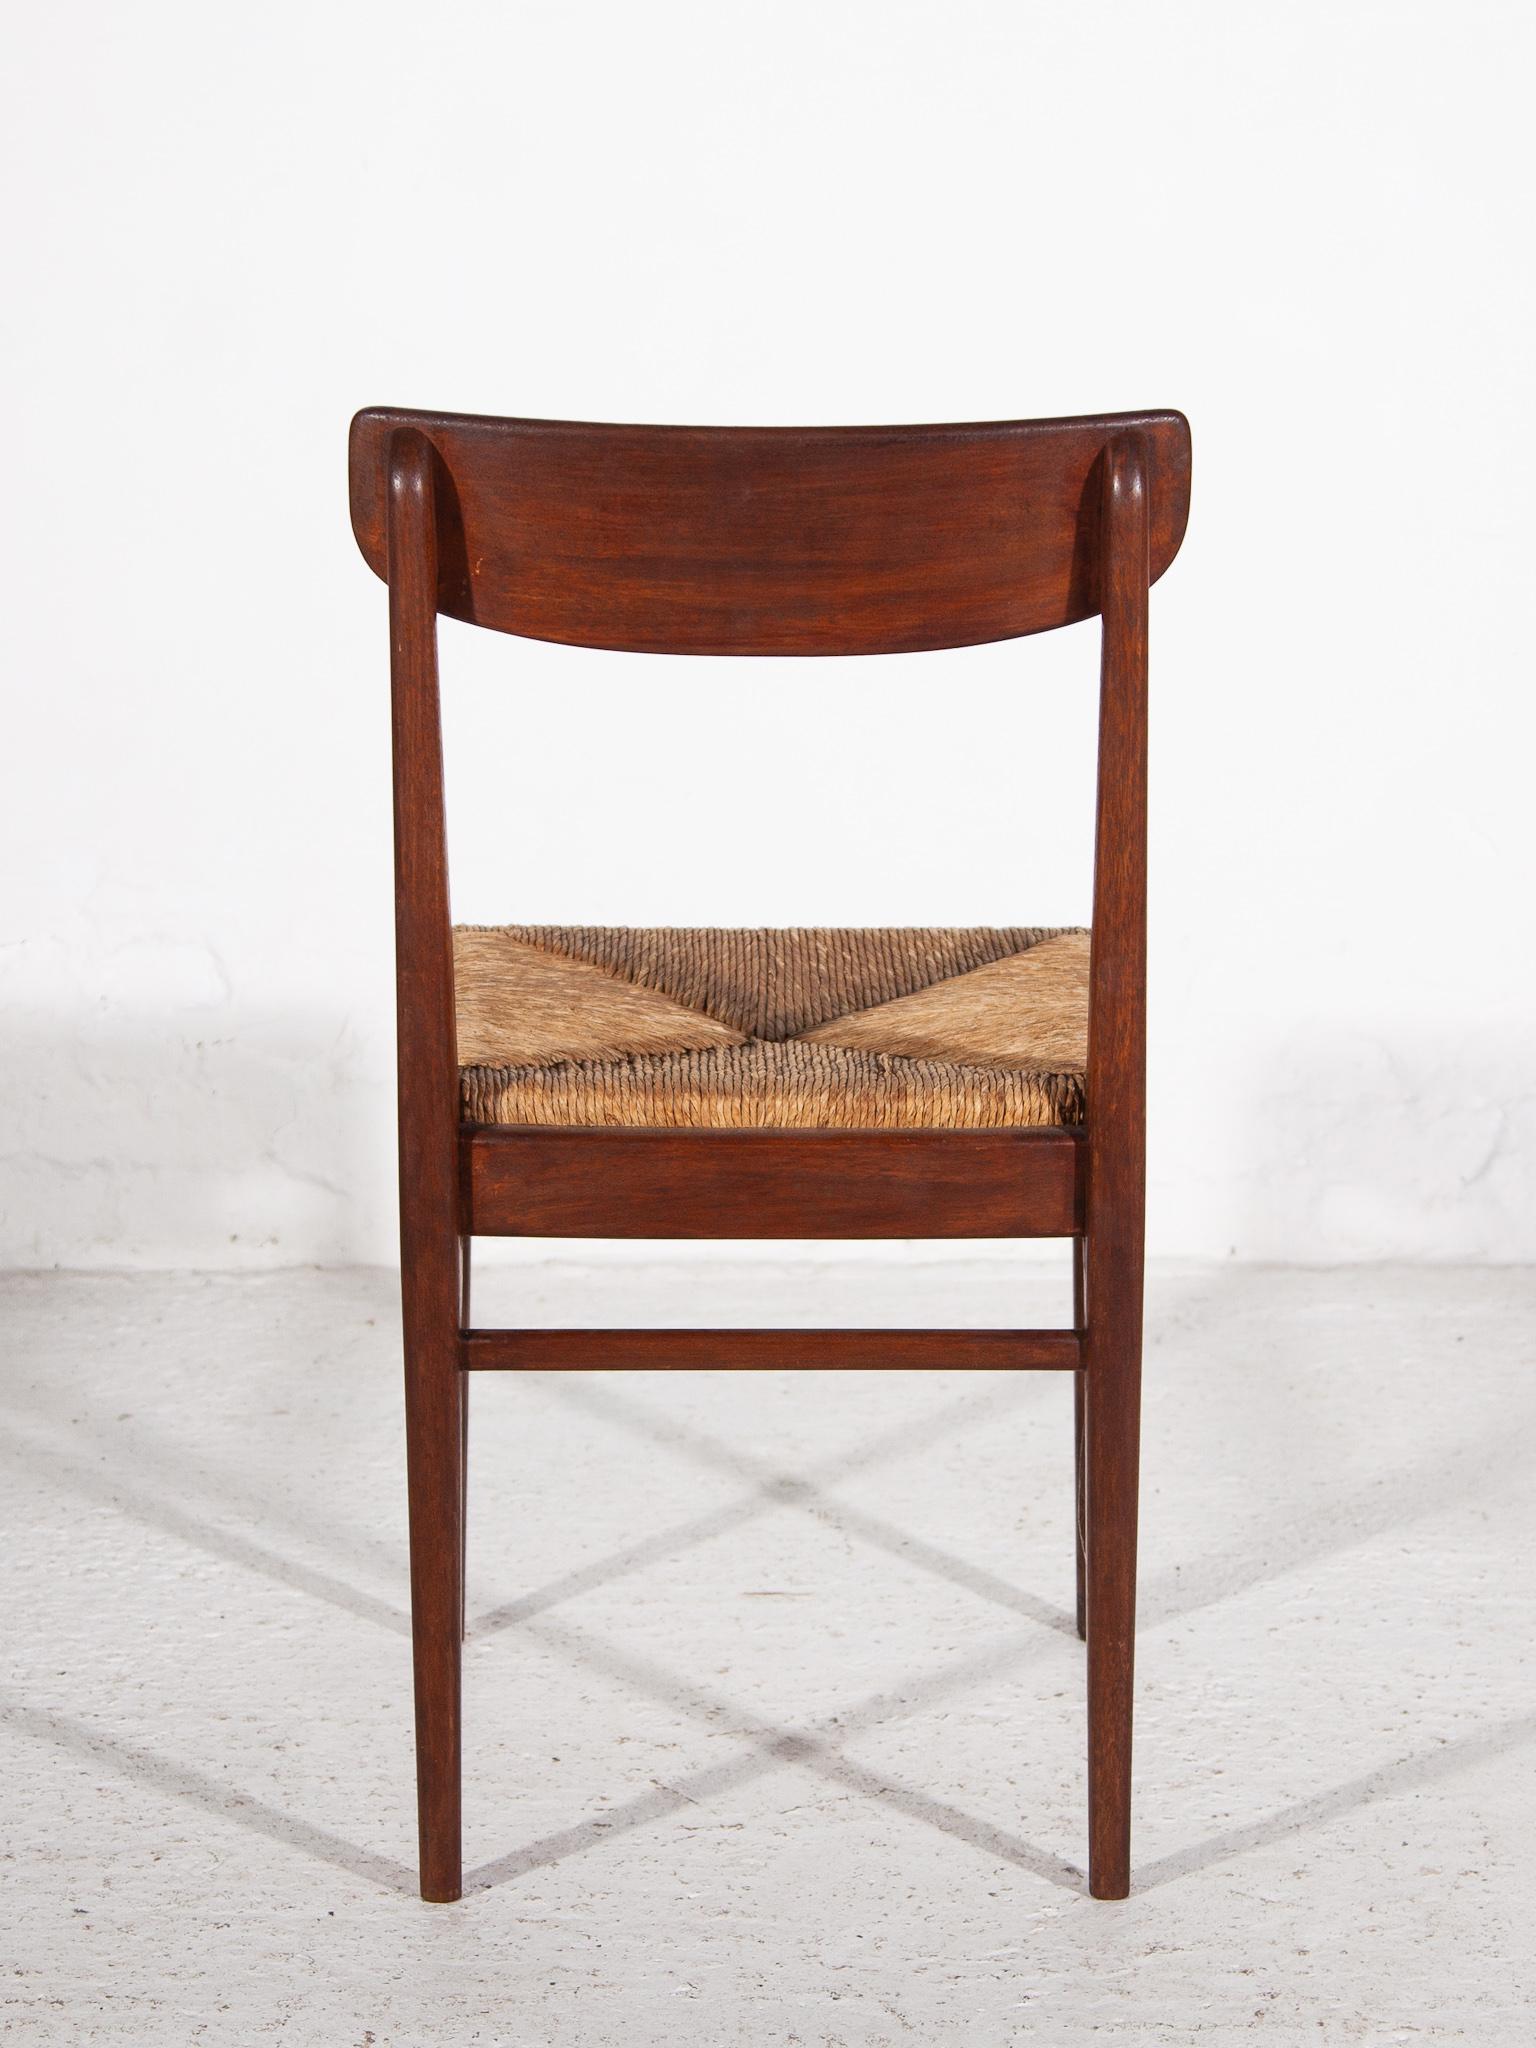 Teak Dining Chairs with Rattan Sea, t 1959, Belgium For Sale 3